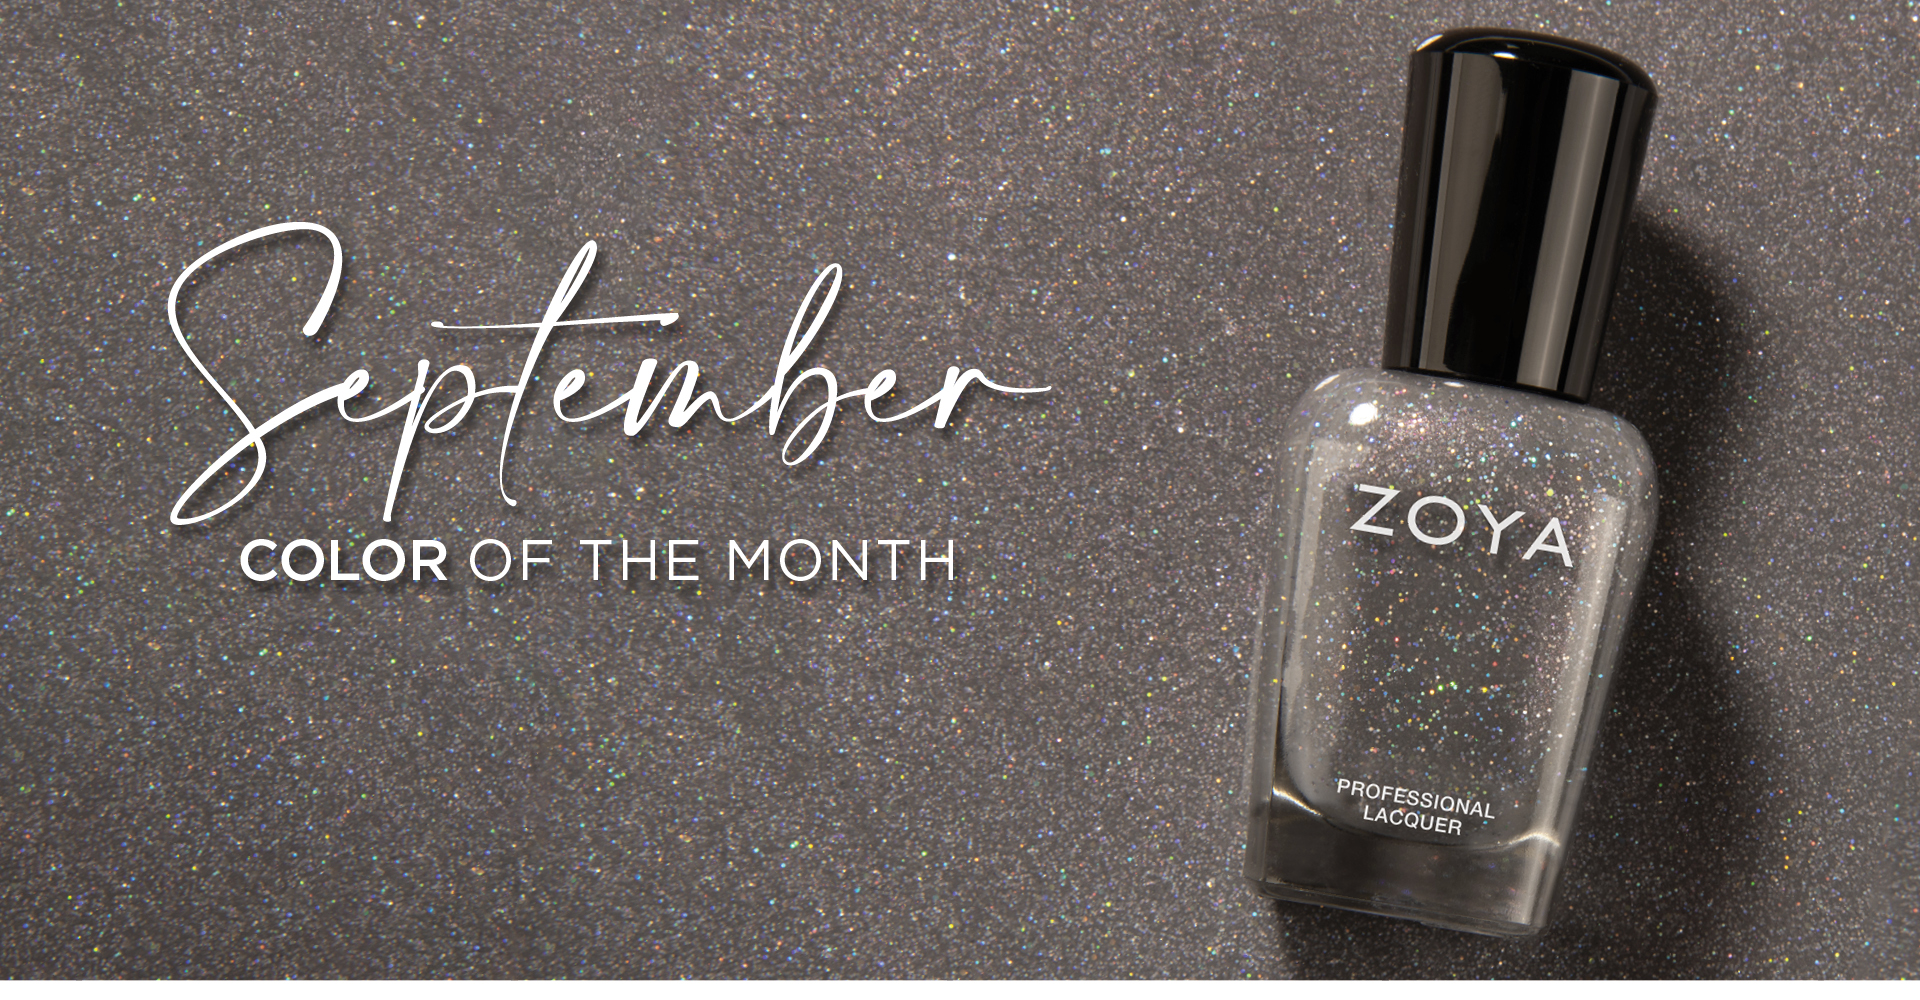 Connnor September color of the Month